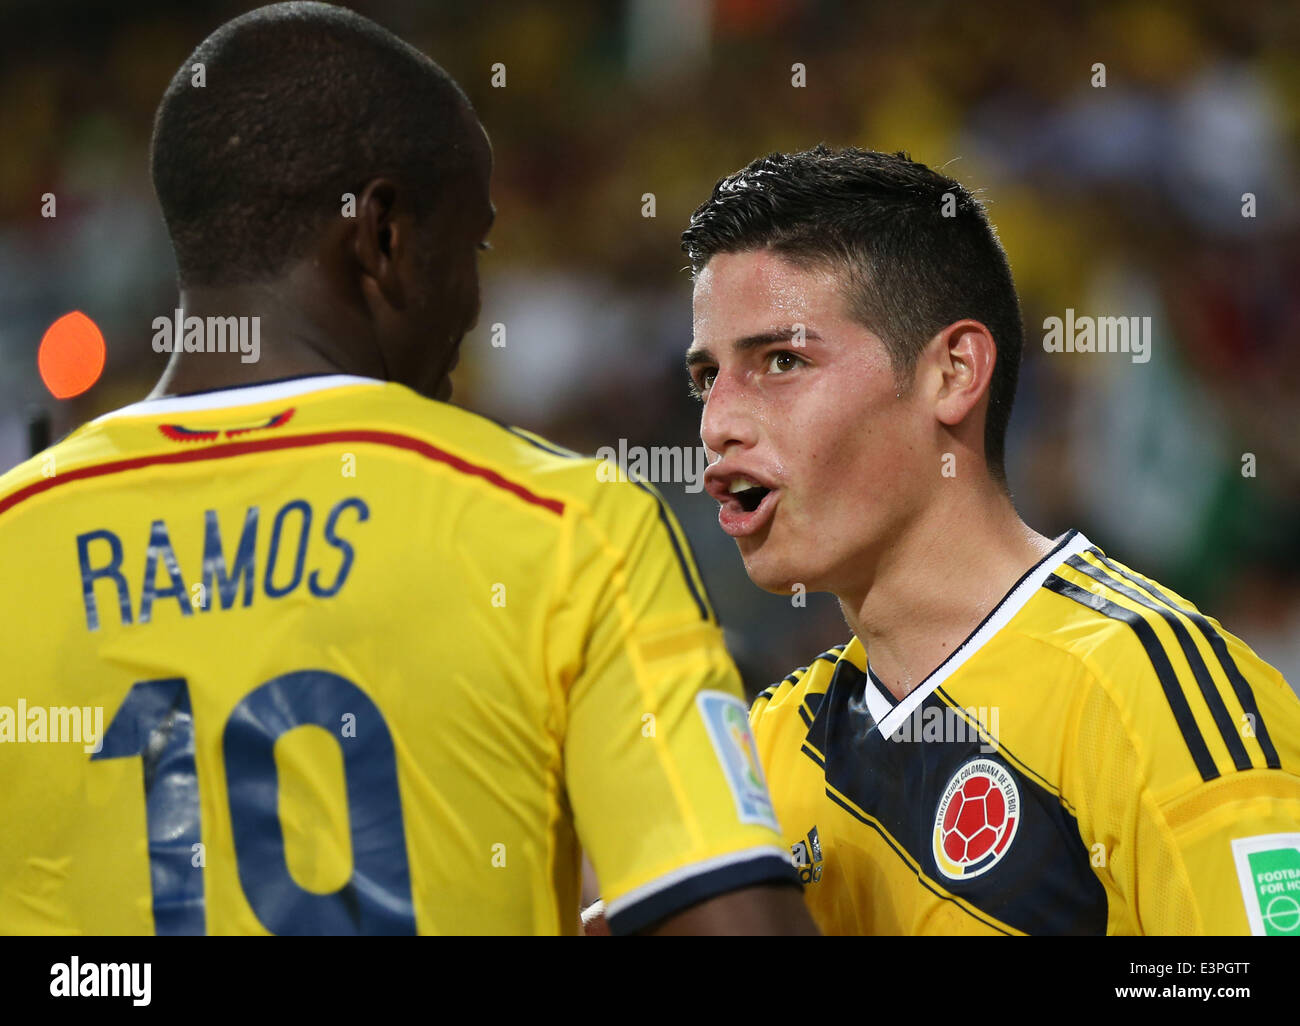 (140624) -- CUIABA, June 24, 2014 (Xinhua) -- Colombia's James Rodriguez (R) celebrates the goal during a Group C match between Japan and Colombia of 2014 FIFA World Cup at the Arena Pantanal Stadium in Cuiaba, Brazil, June 24, 2014. (Xinhua/Li Ming) Stock Photo